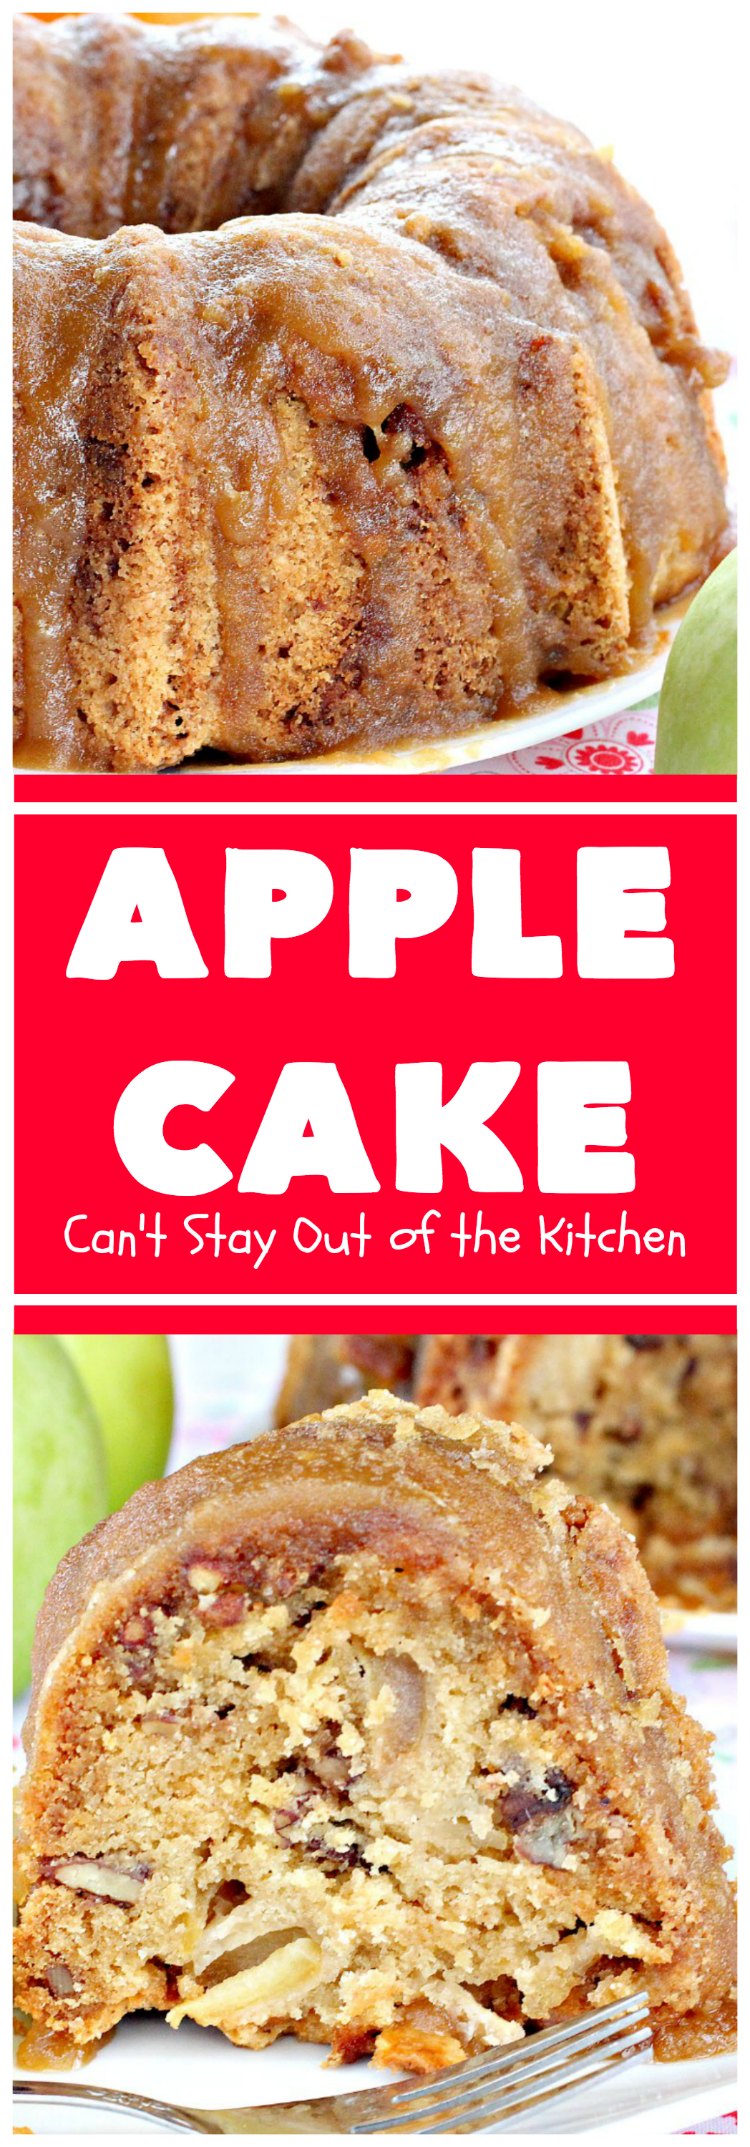 Apple Cake | Can't Stay Out of the Kitchen